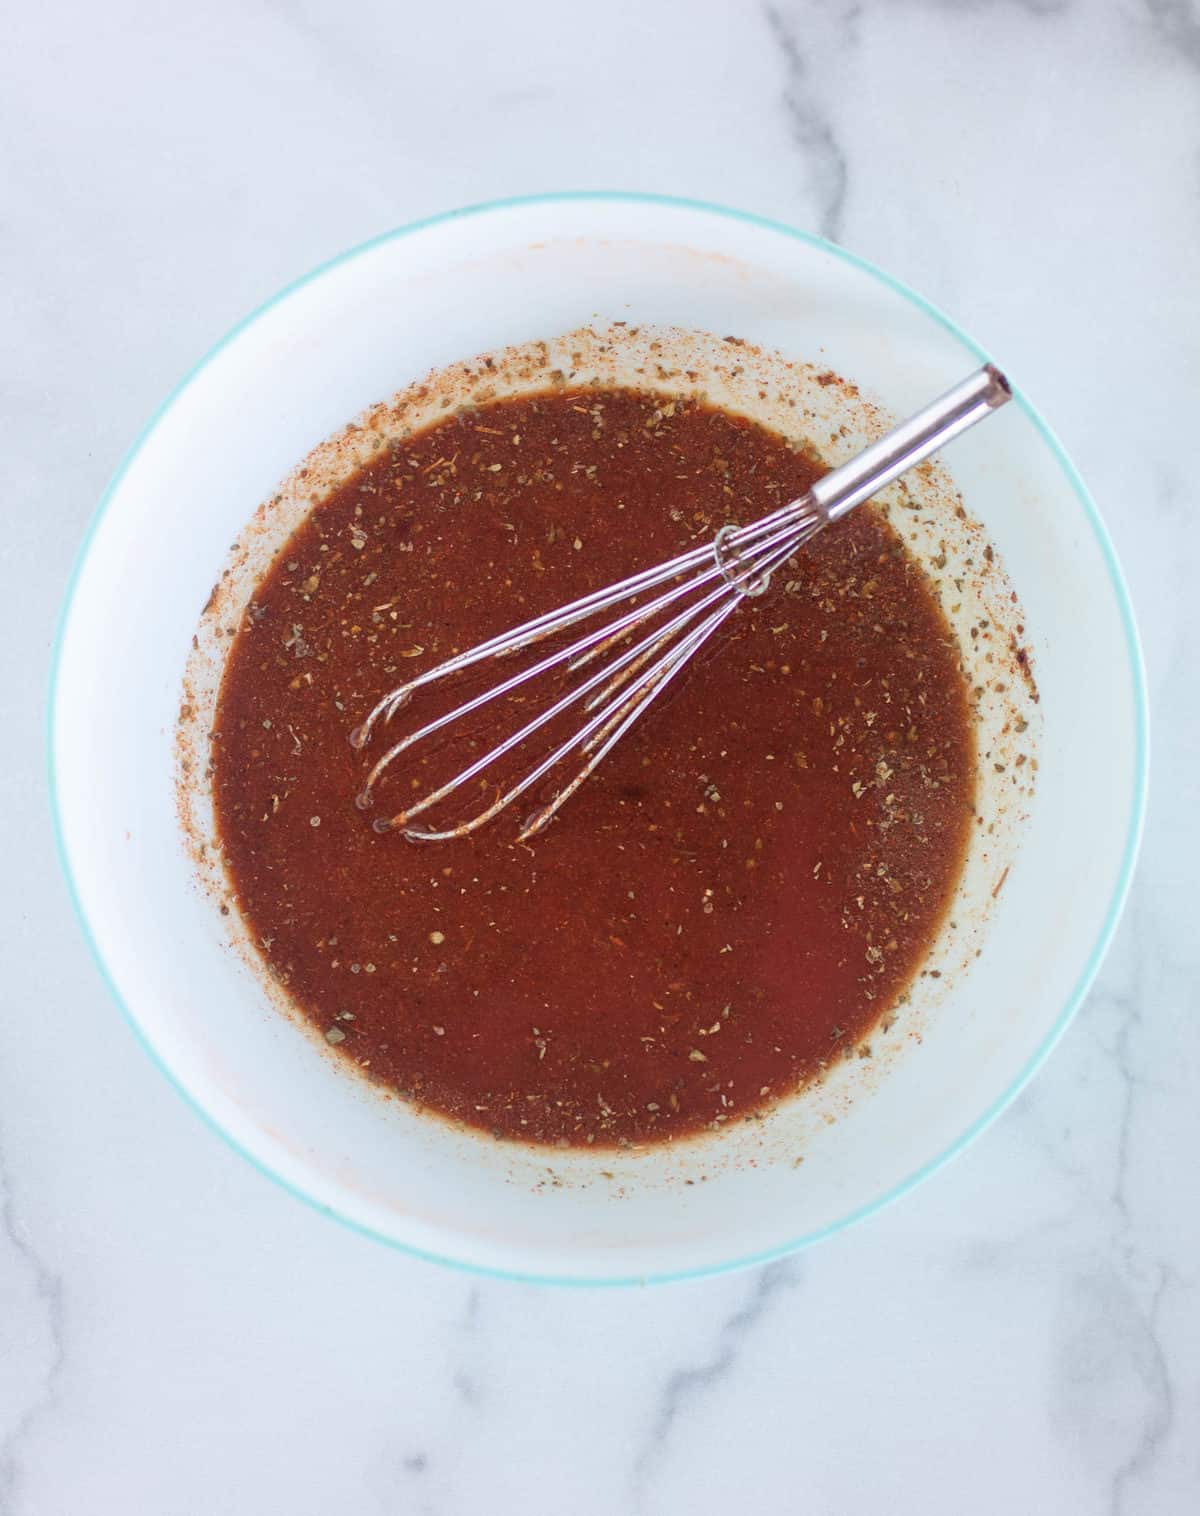 tomato sauce, water, and spices in mixing bowl with whisk